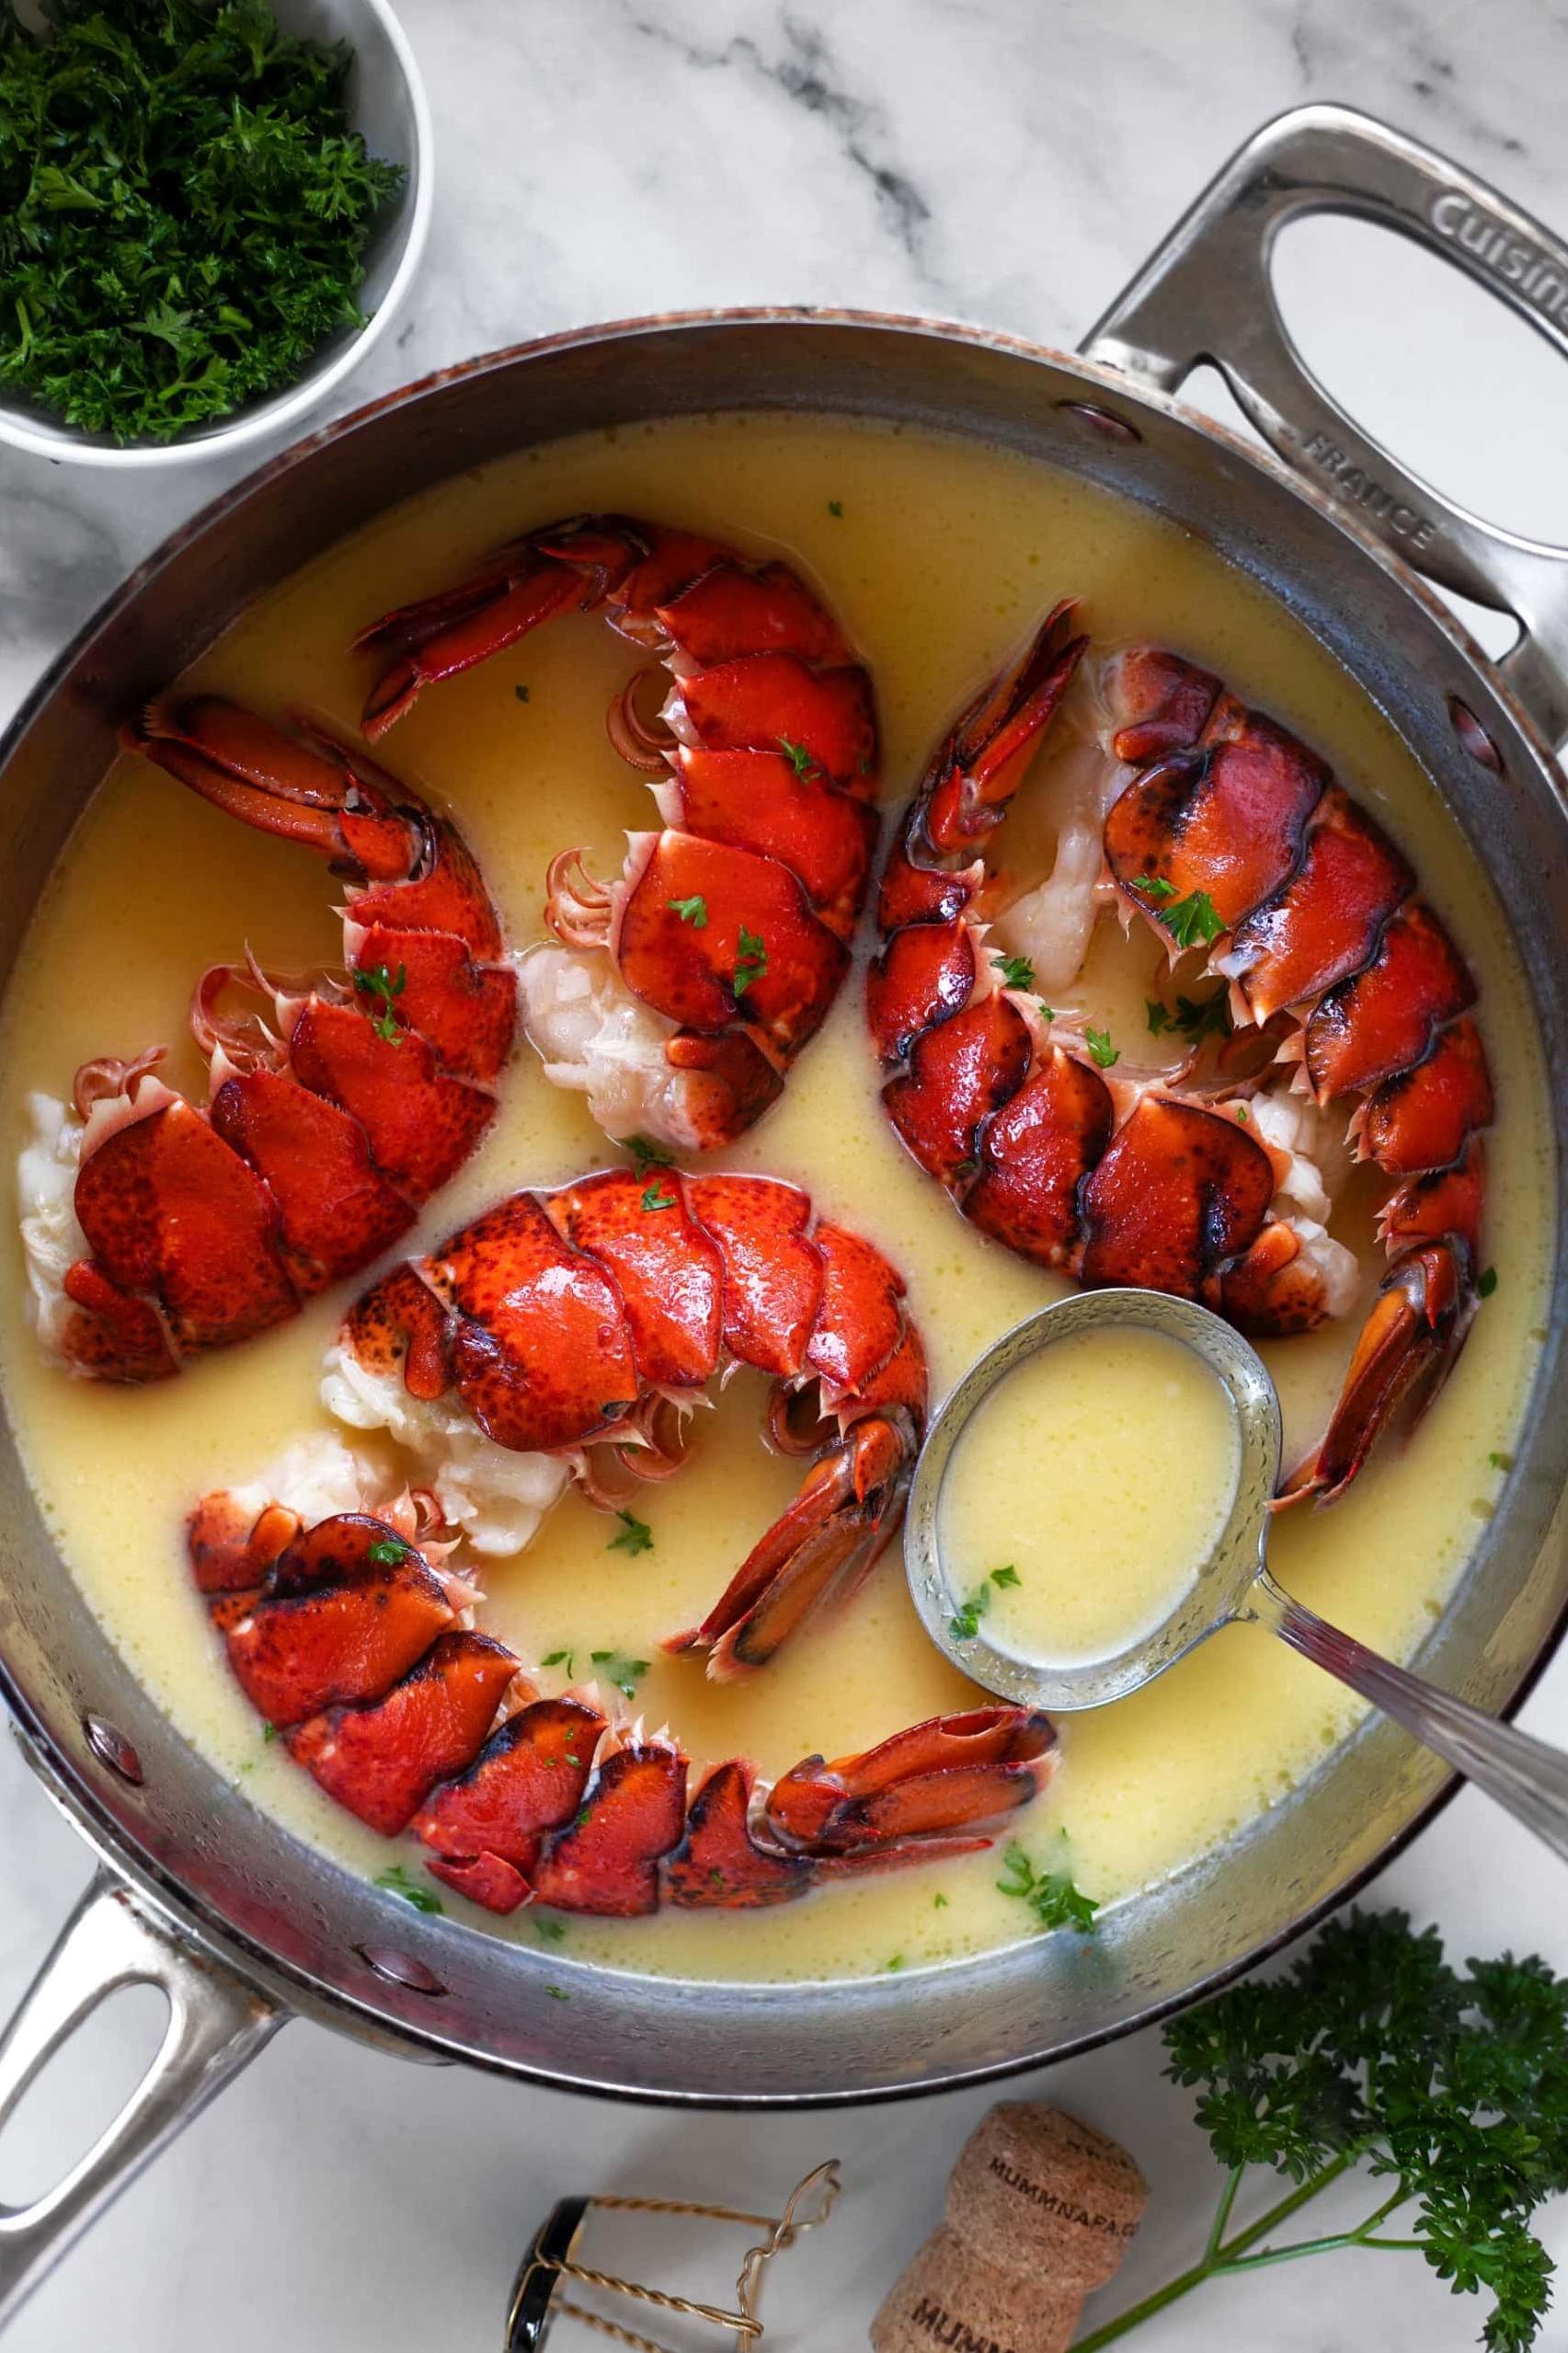 Lobster with Champagne Dipping Sauce